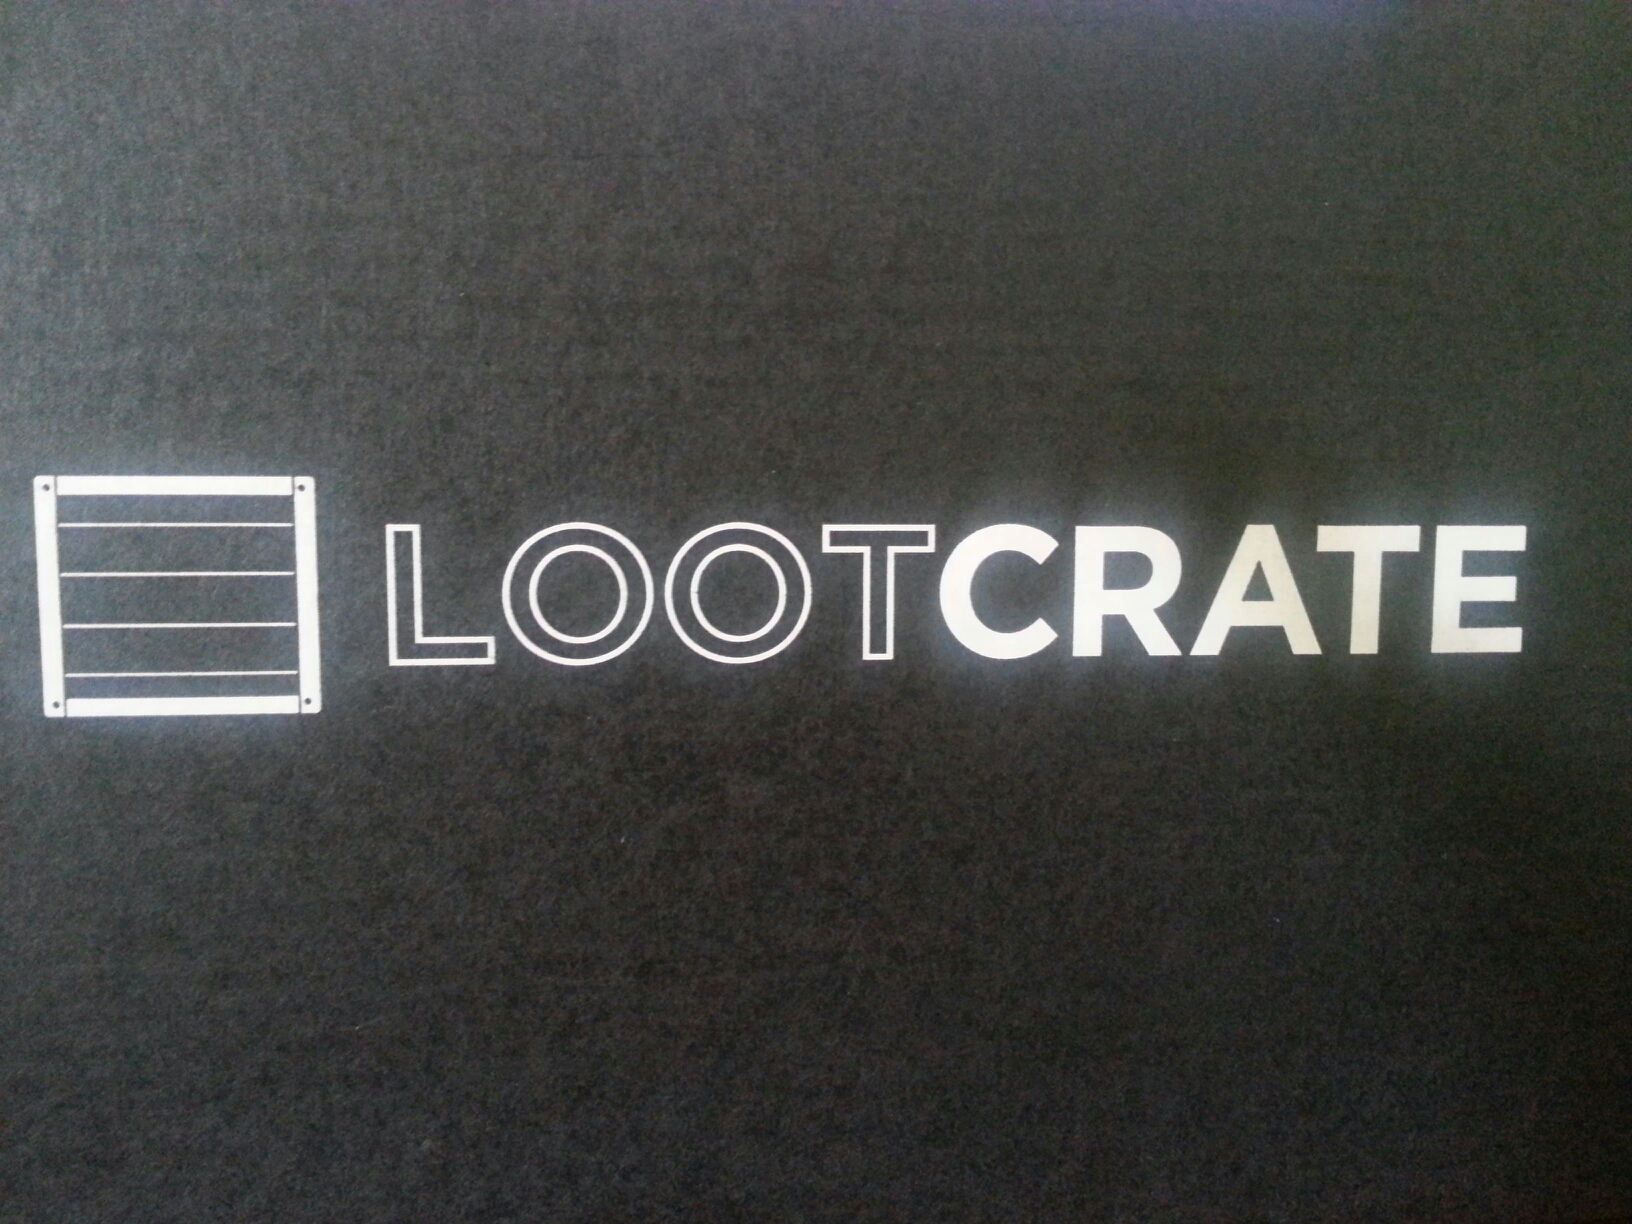 Loot crate monthly subscription box